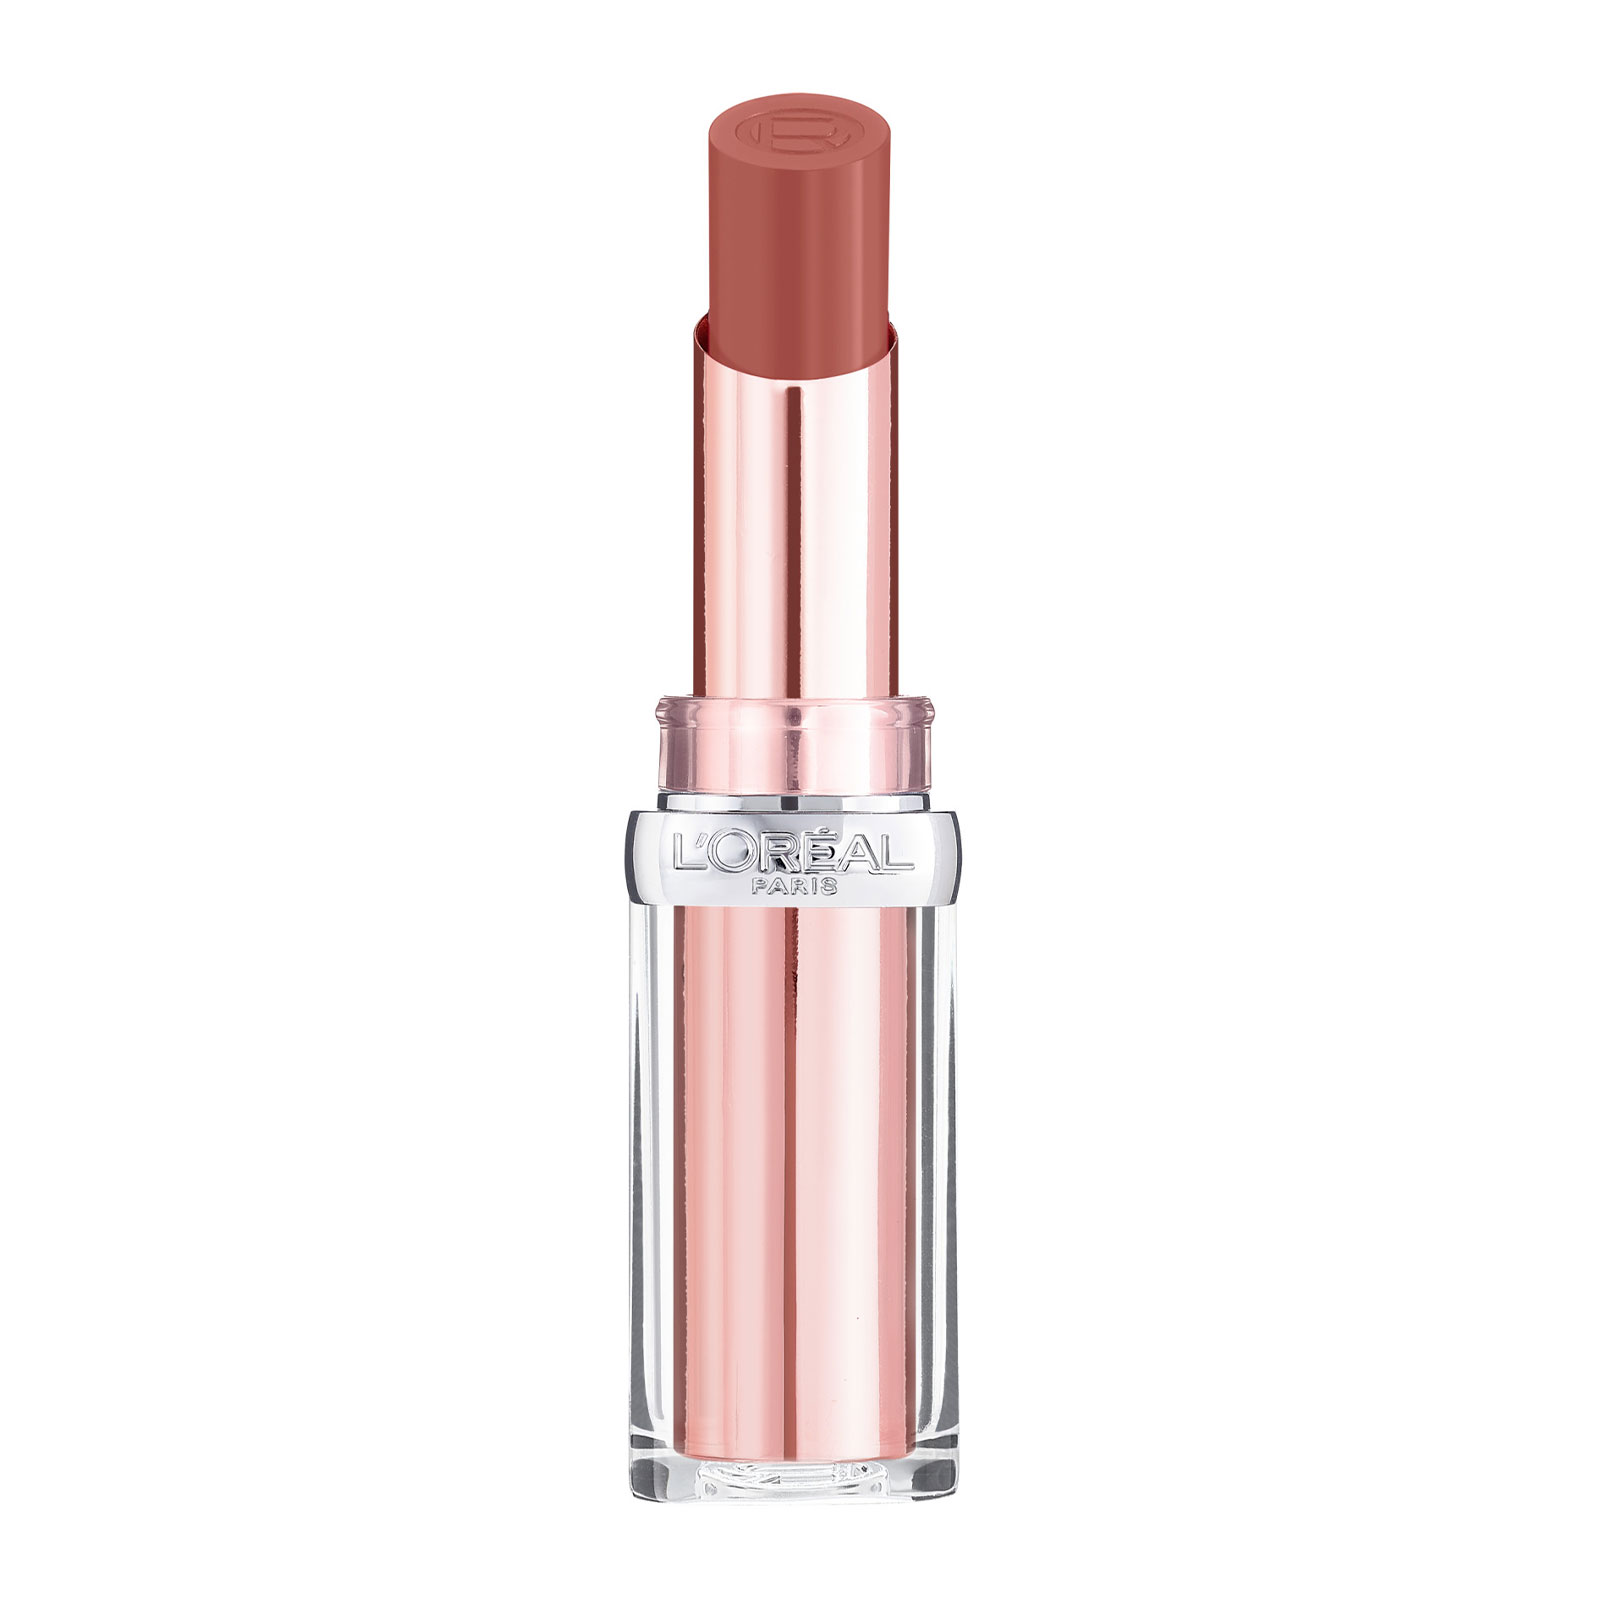 L'Oreal Paris Glow Paradise Natural-Looking Balm-In-Lipstick 3.8G 191-Nude Heaven